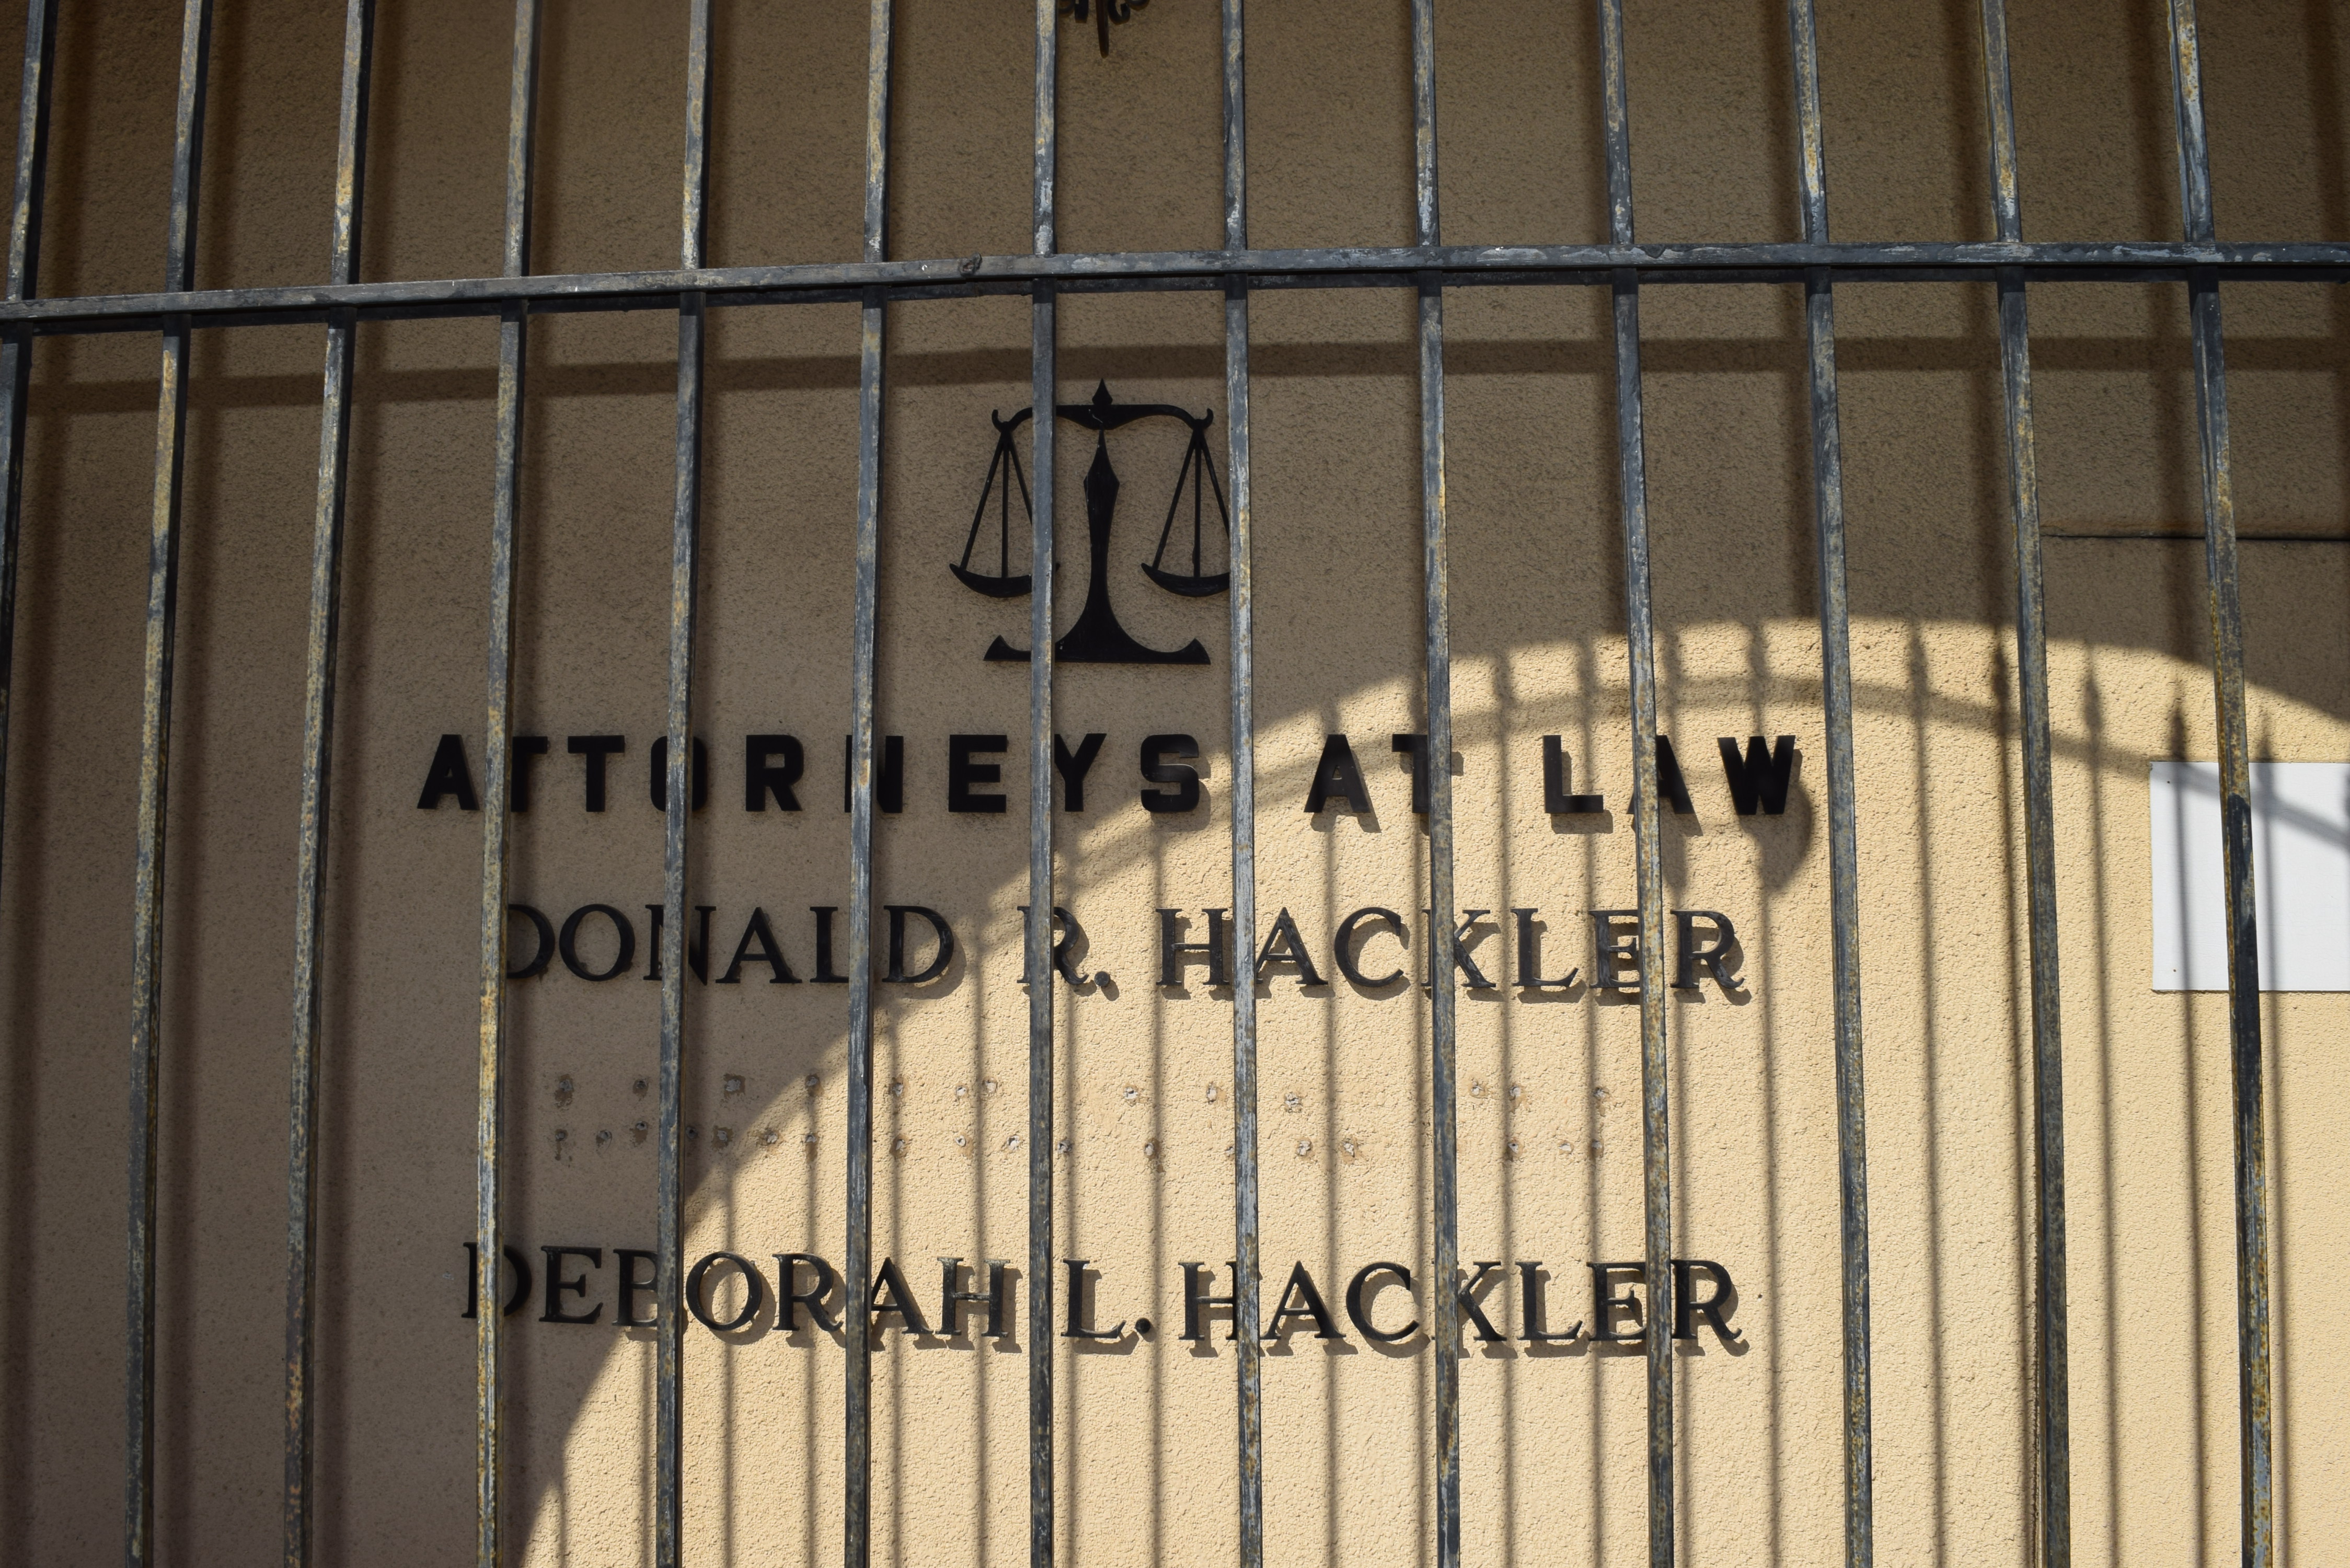 A cream wall, the front of an office, with black lettering reading "Donald R. Hackler" on one line and "Deborah L. Hackler" on another.